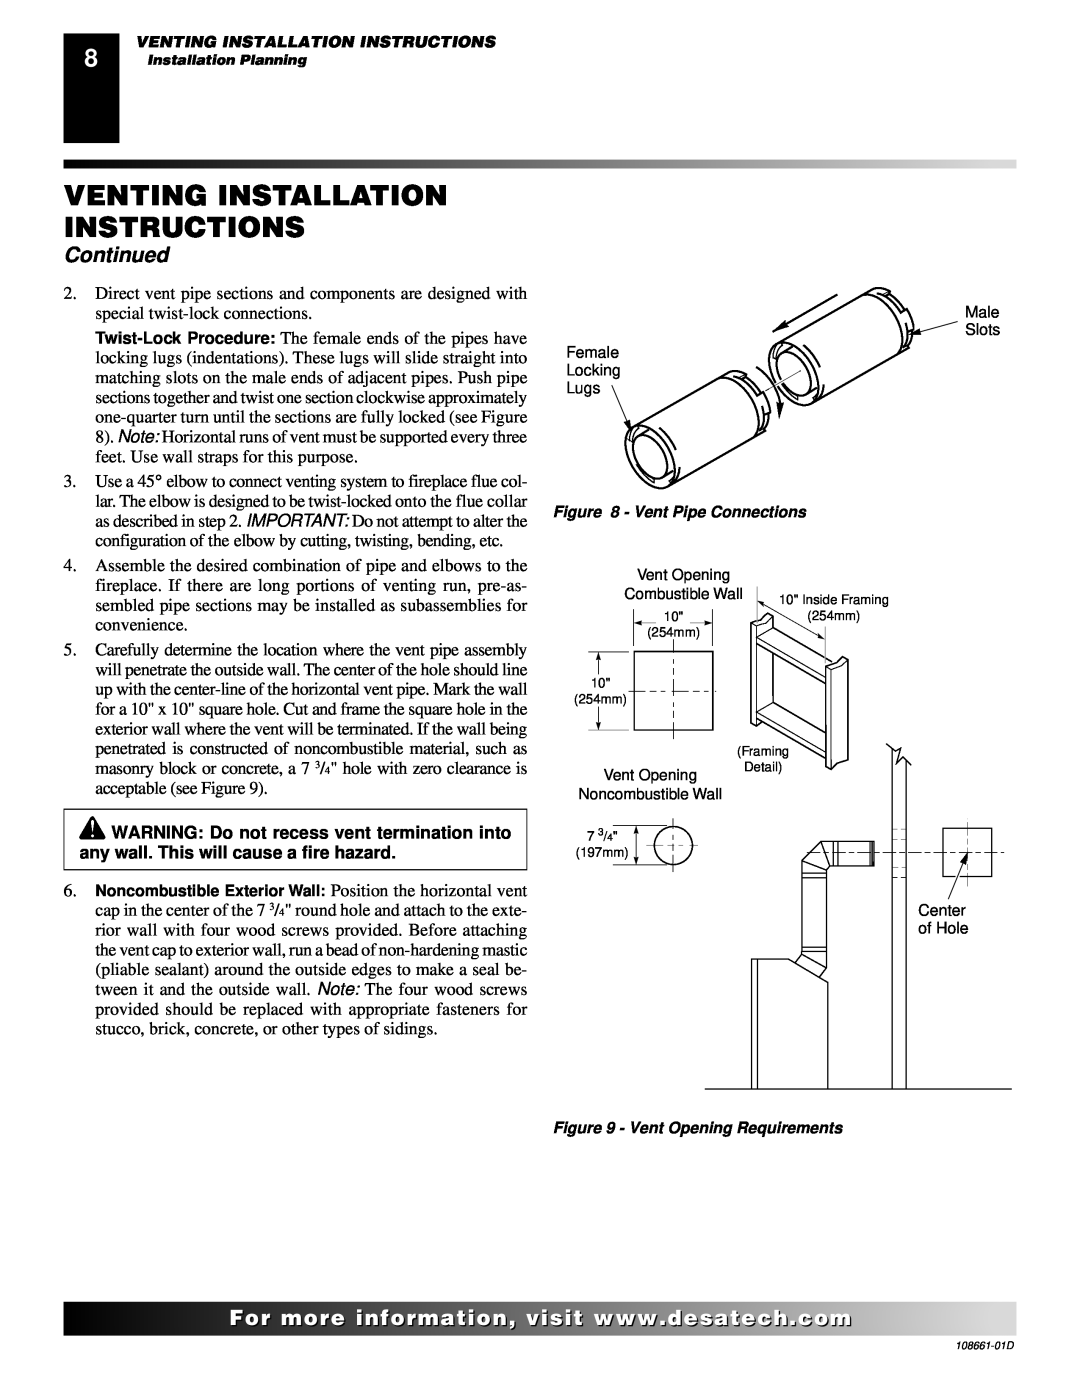 Desa CTDV36NR Venting Installation Instructions, Continued, Male Slots Female Locking Lugs, Vent Pipe Connections, Center 